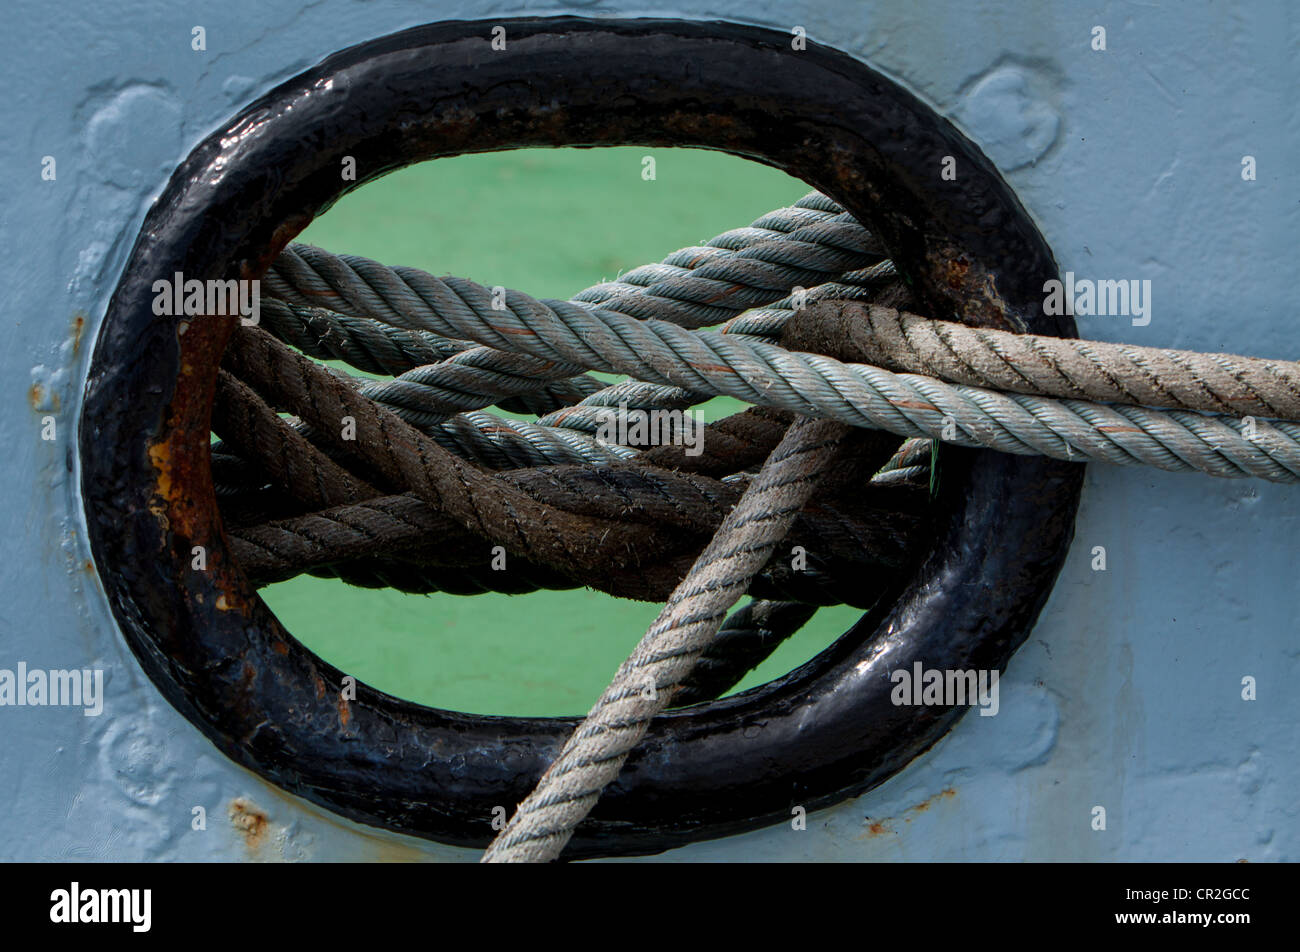 Mooring lines coming out of a hole in a ship Stock Photo